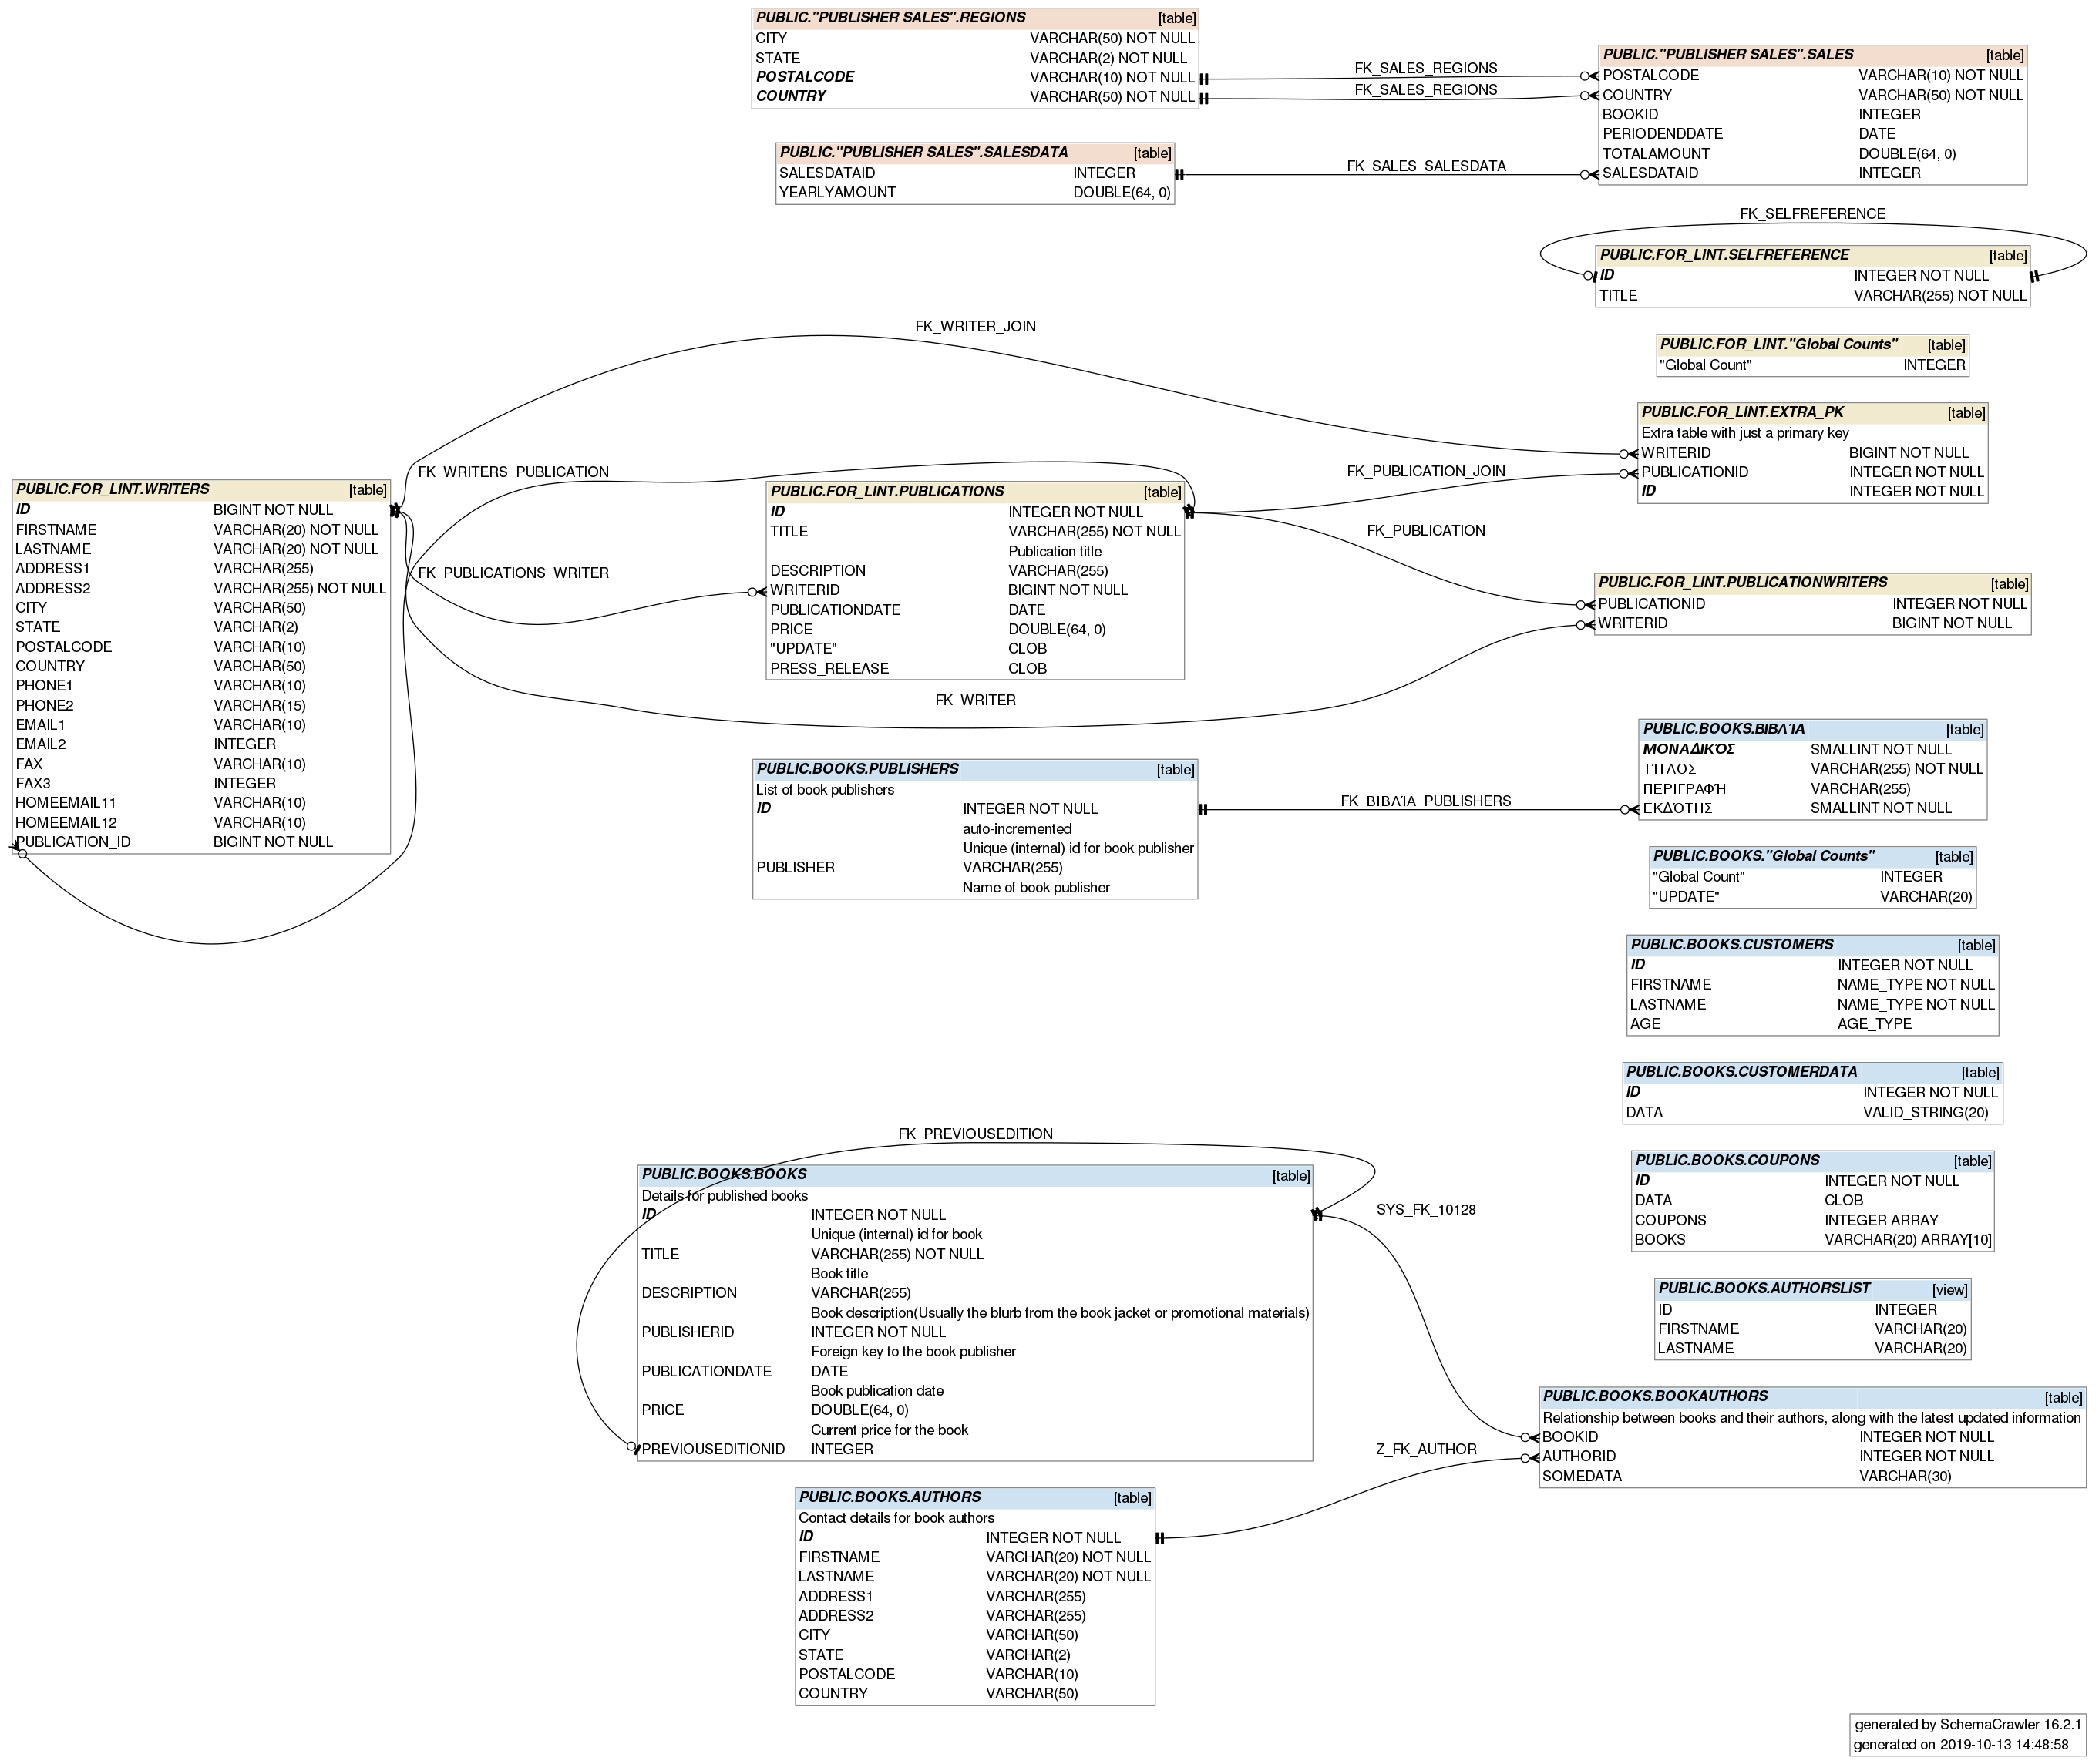 Schemacrawler - Free Database Schema Discovery And pertaining to Er Diagram Stored Procedures